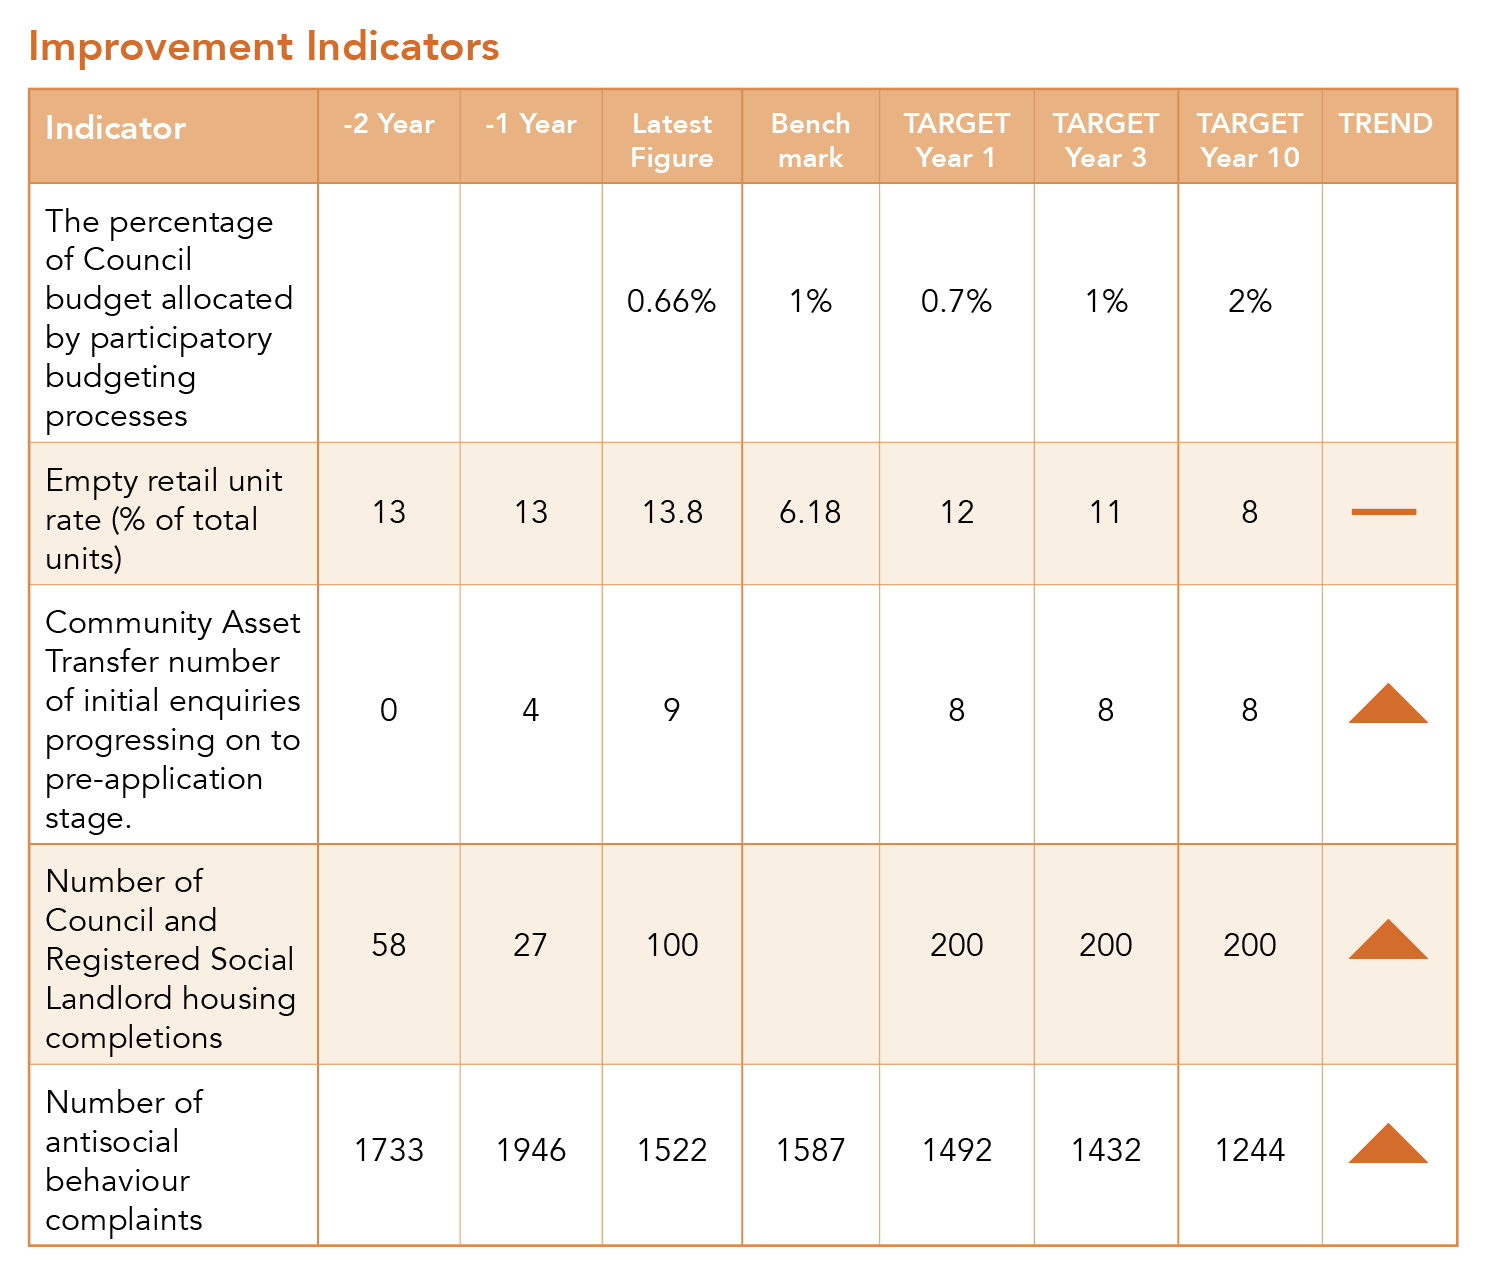 This picture shows a table of key indicators containing historical data and future targets with long term trend for the Build Resilient and Empowered Communities priority